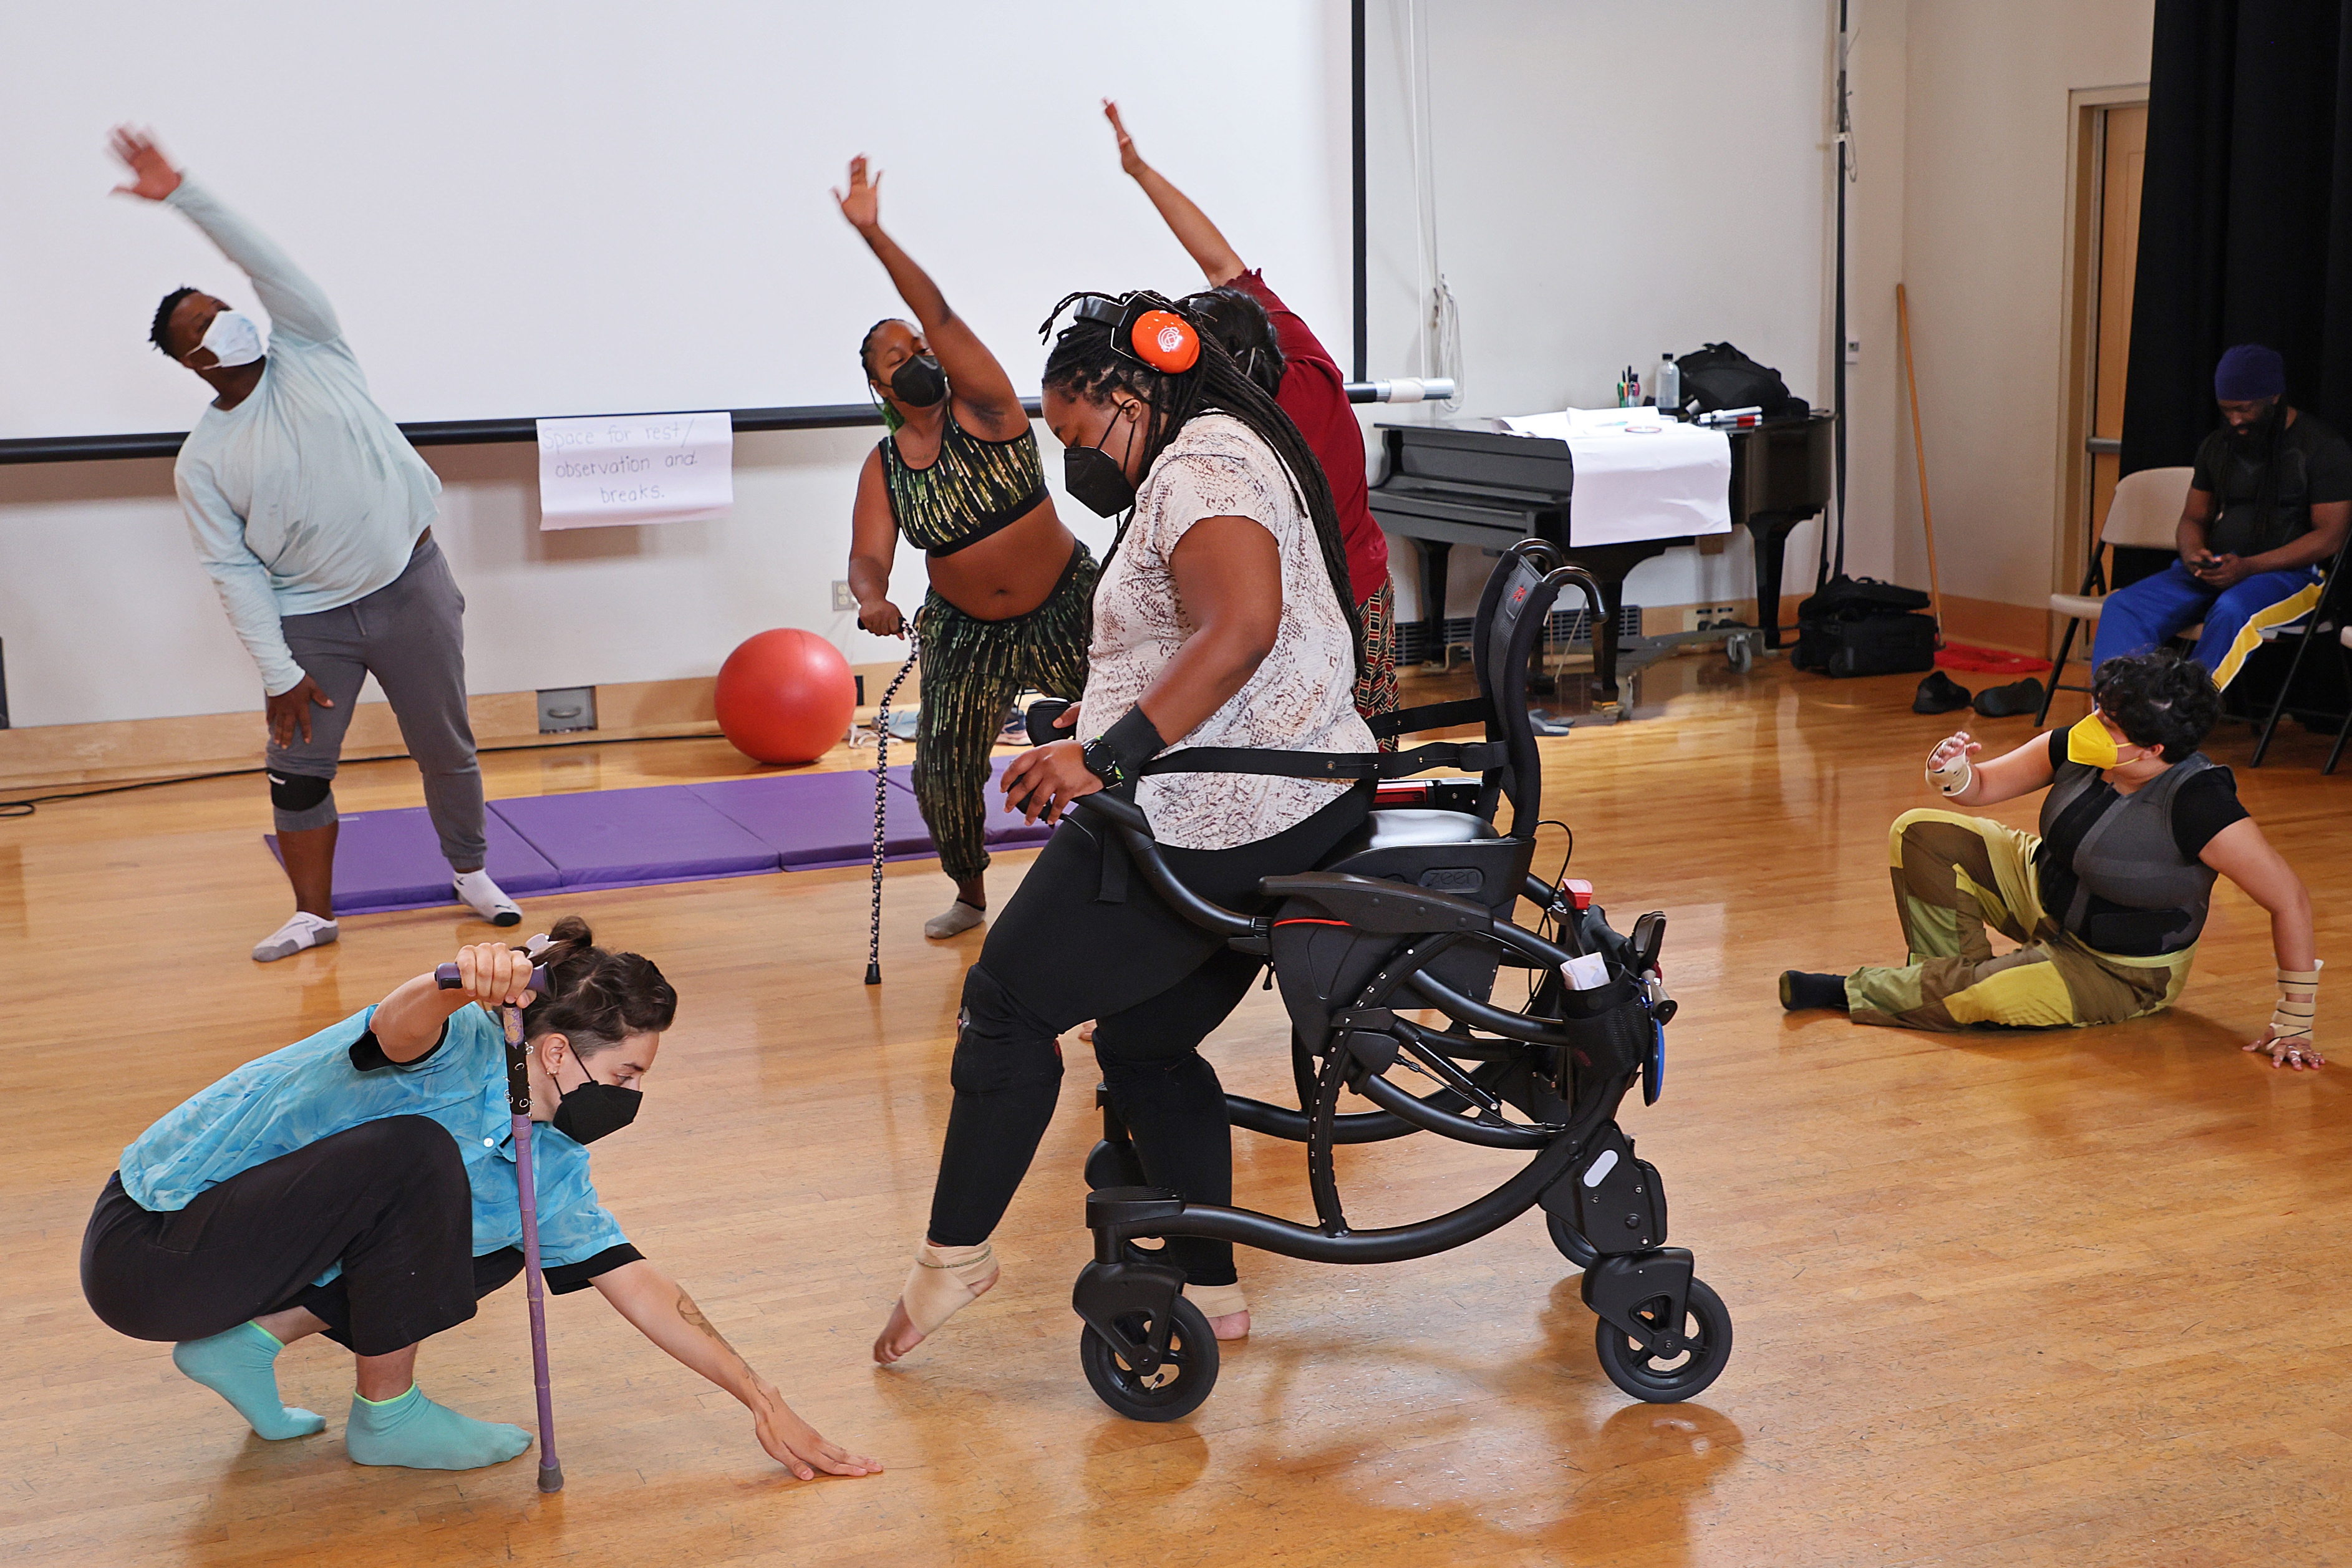 Six people in a dance studio. Some use mobility assistive devices, some are reaching their left arms over their heads, others are crouching or sitting on the floor.